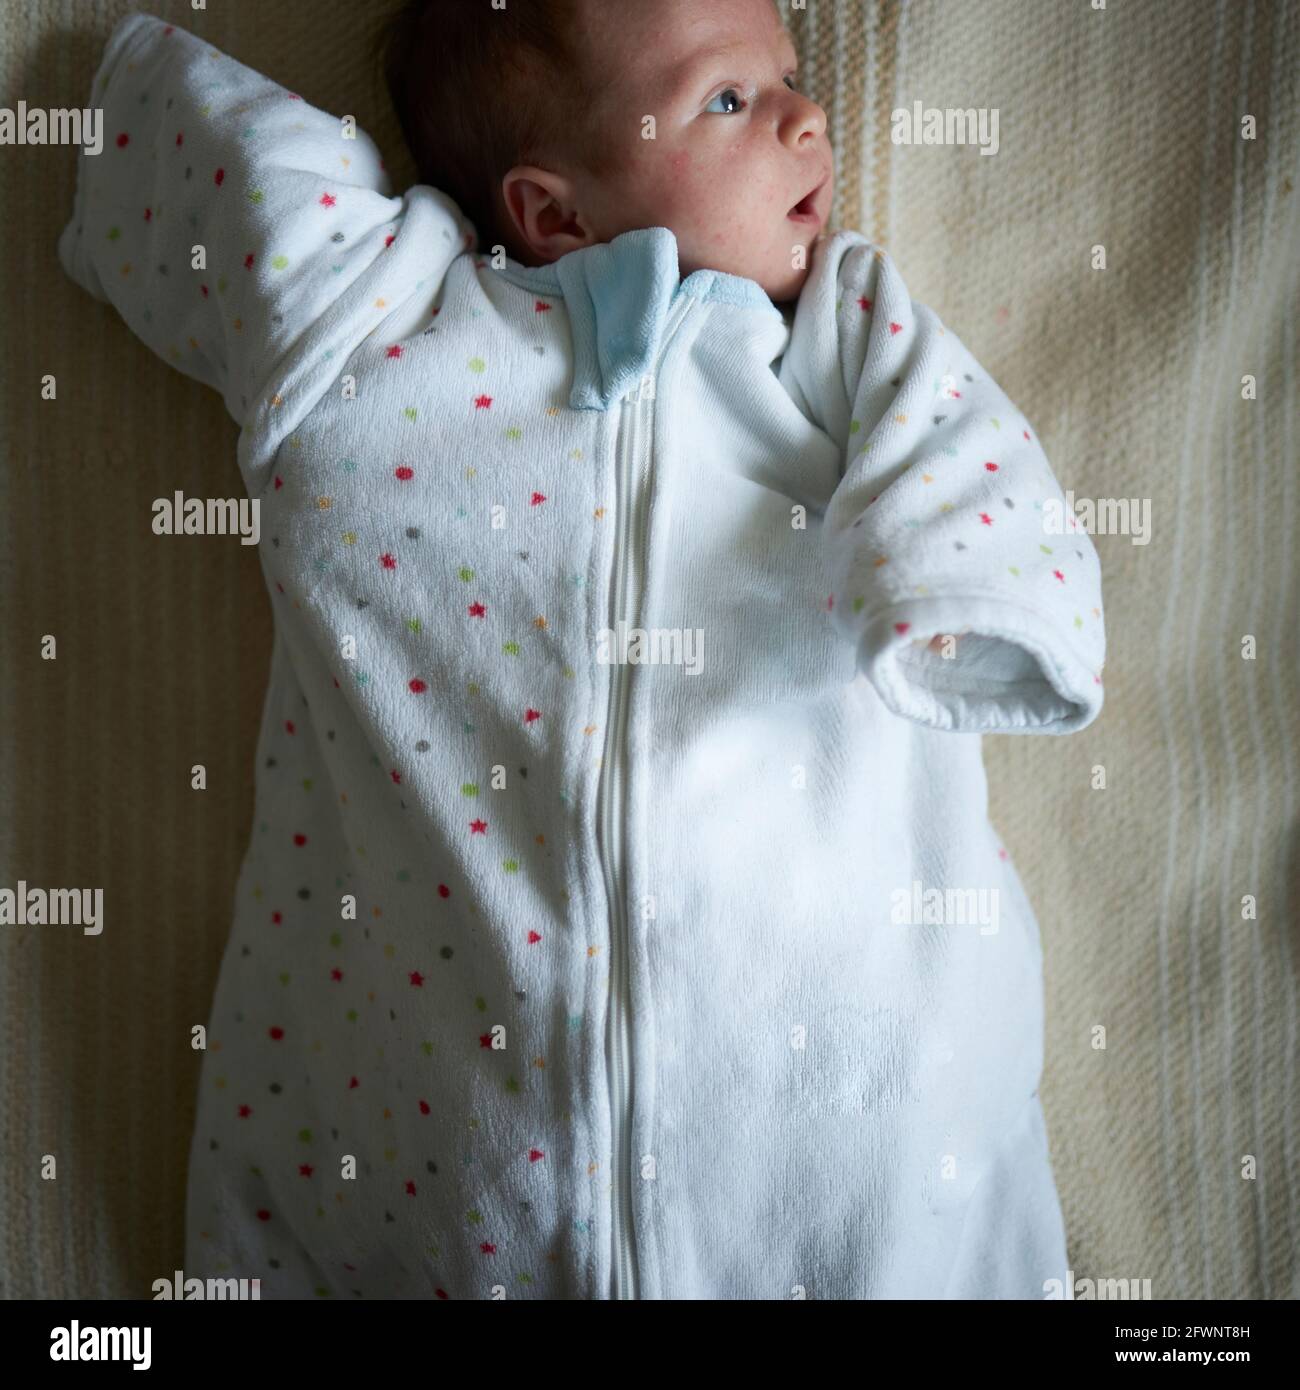 Playful baby in a oversized clothes Stock Photo